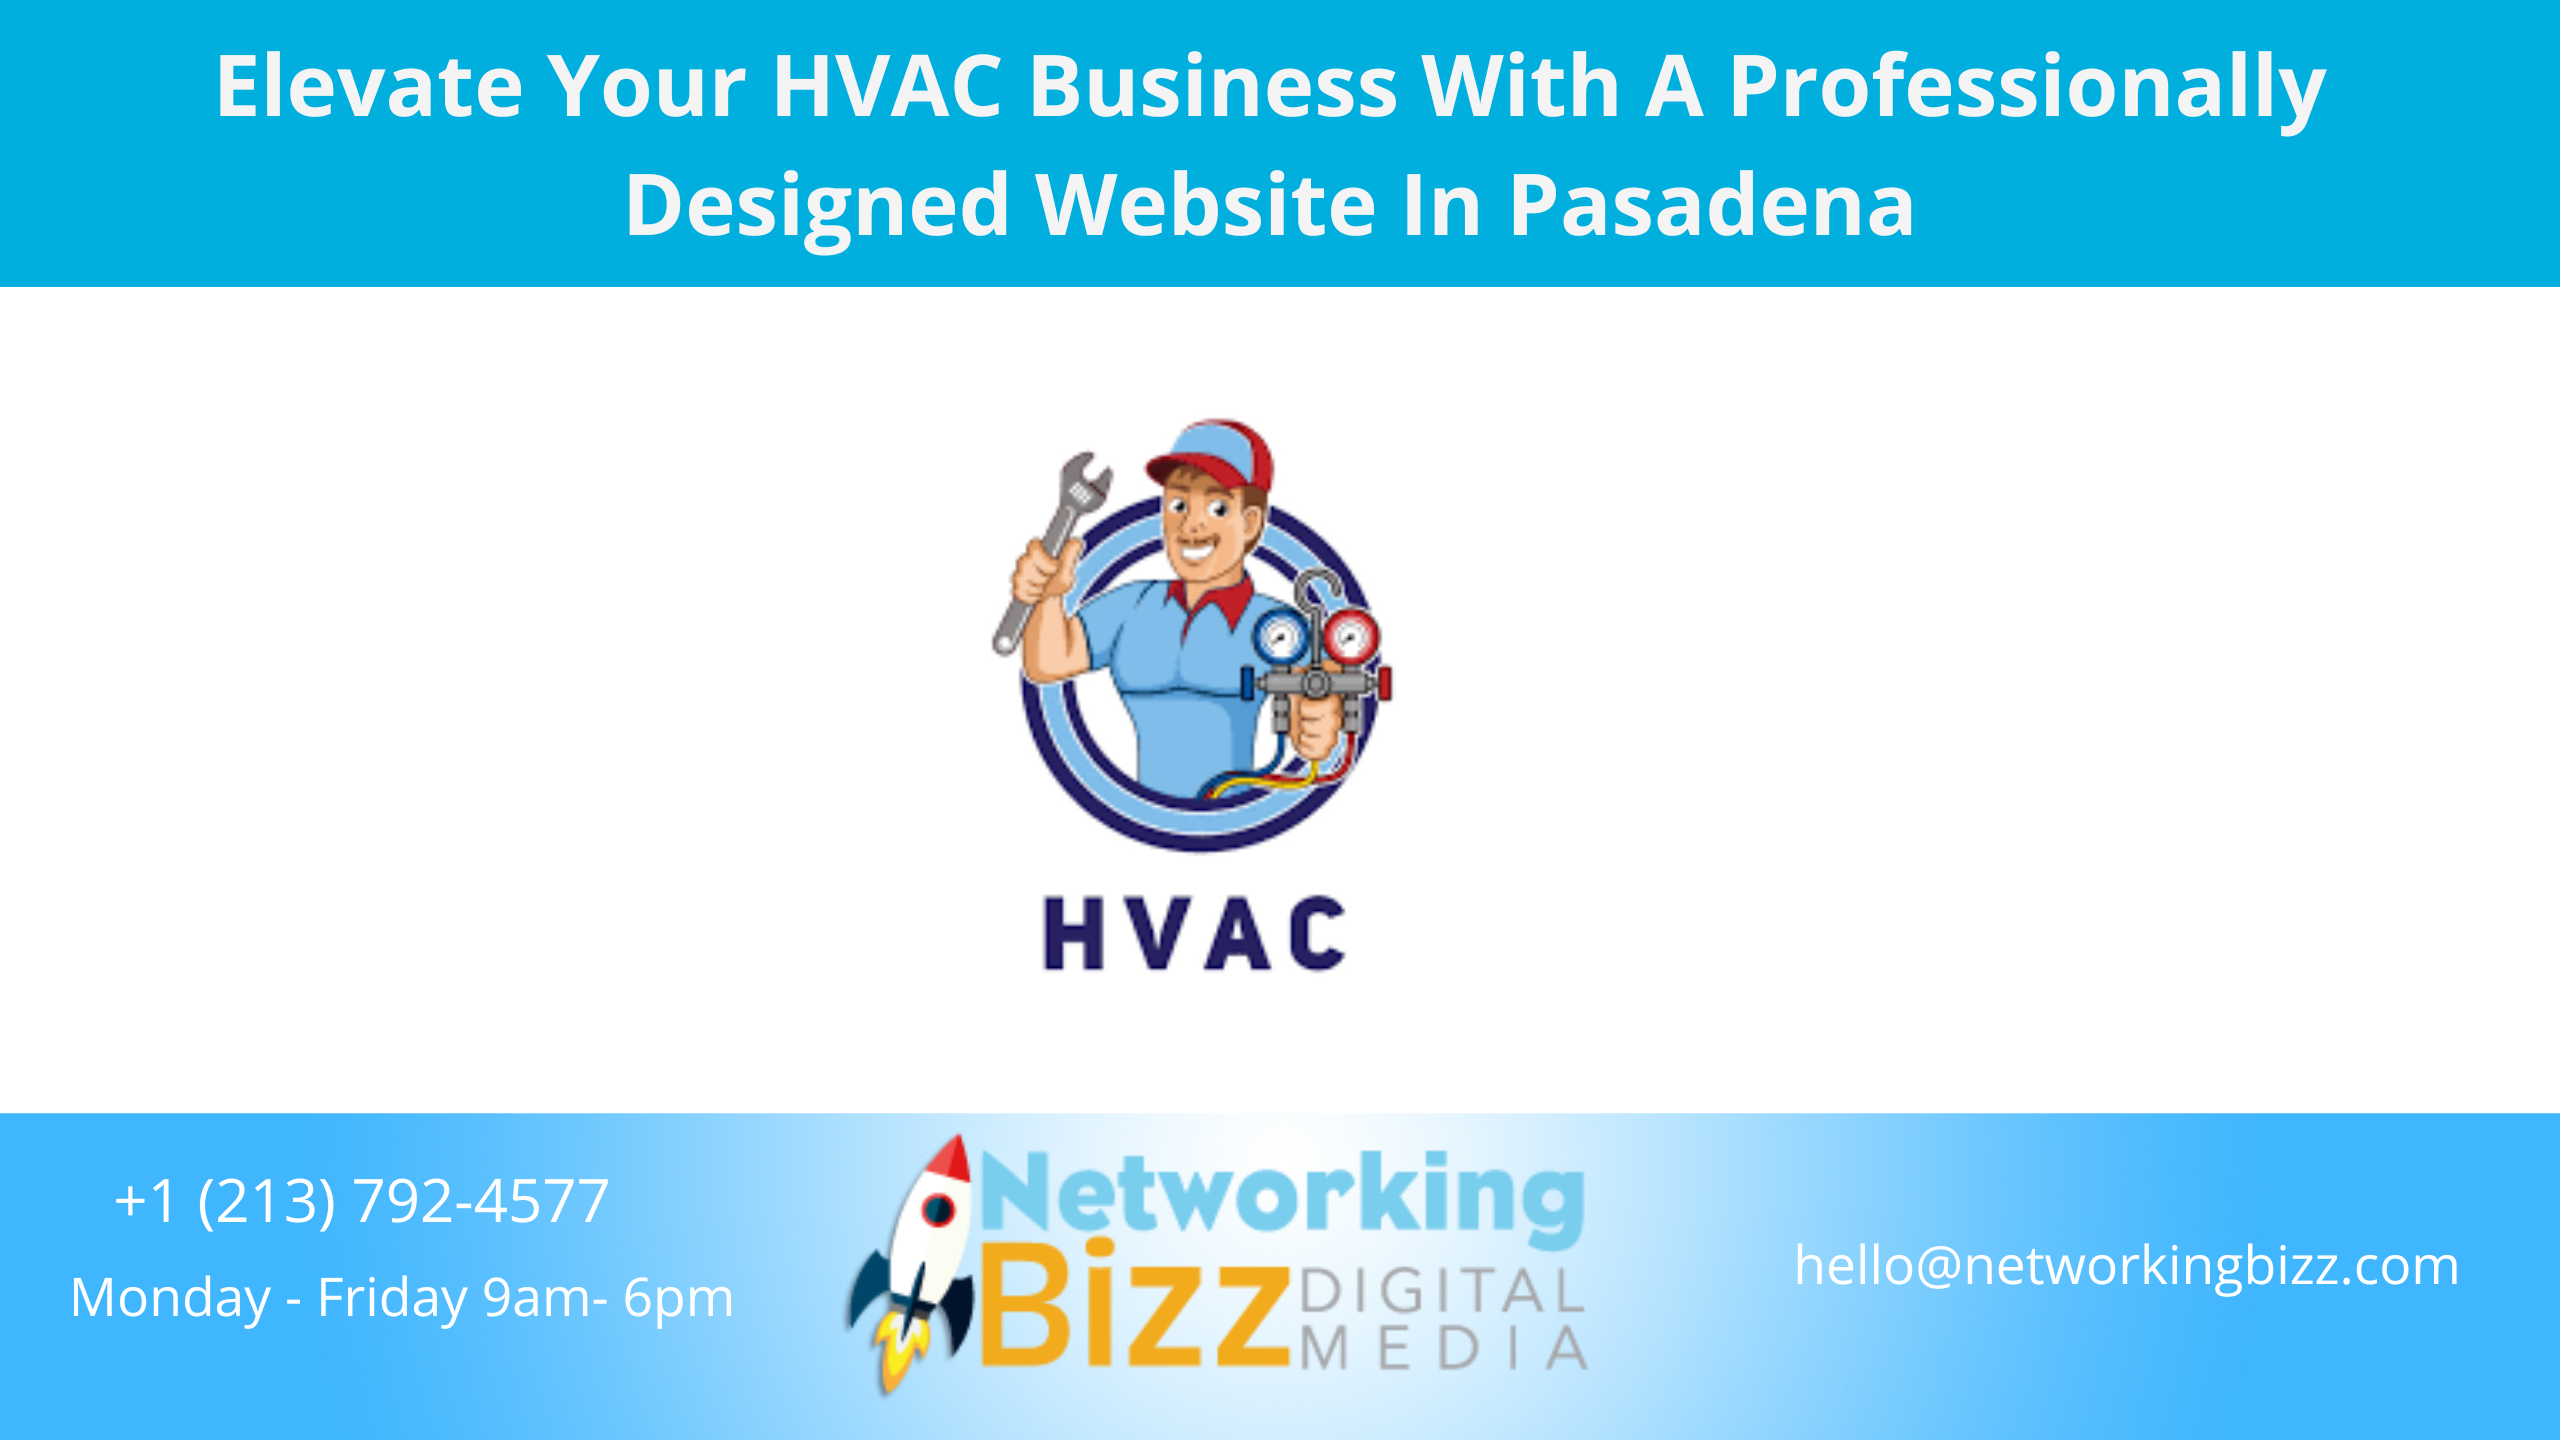 Elevate Your HVAC Business With A Professionally Designed Website In Pasadena